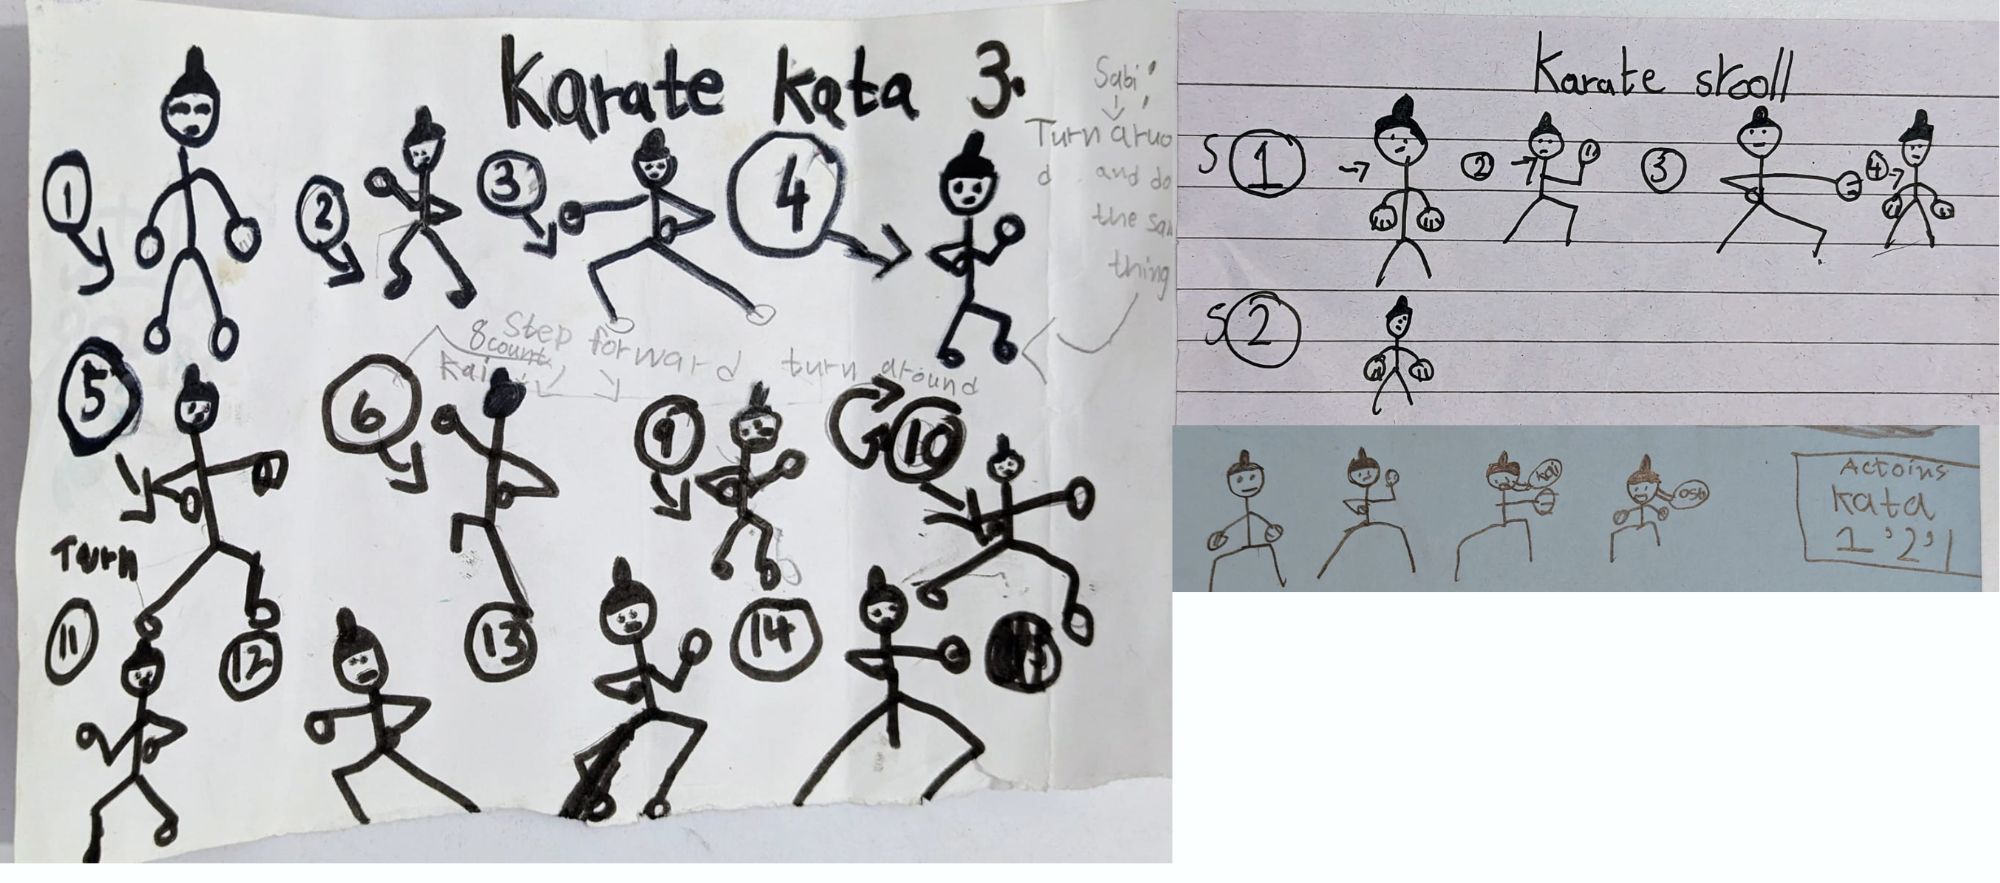 Using visual communication to prepare for Karate tests